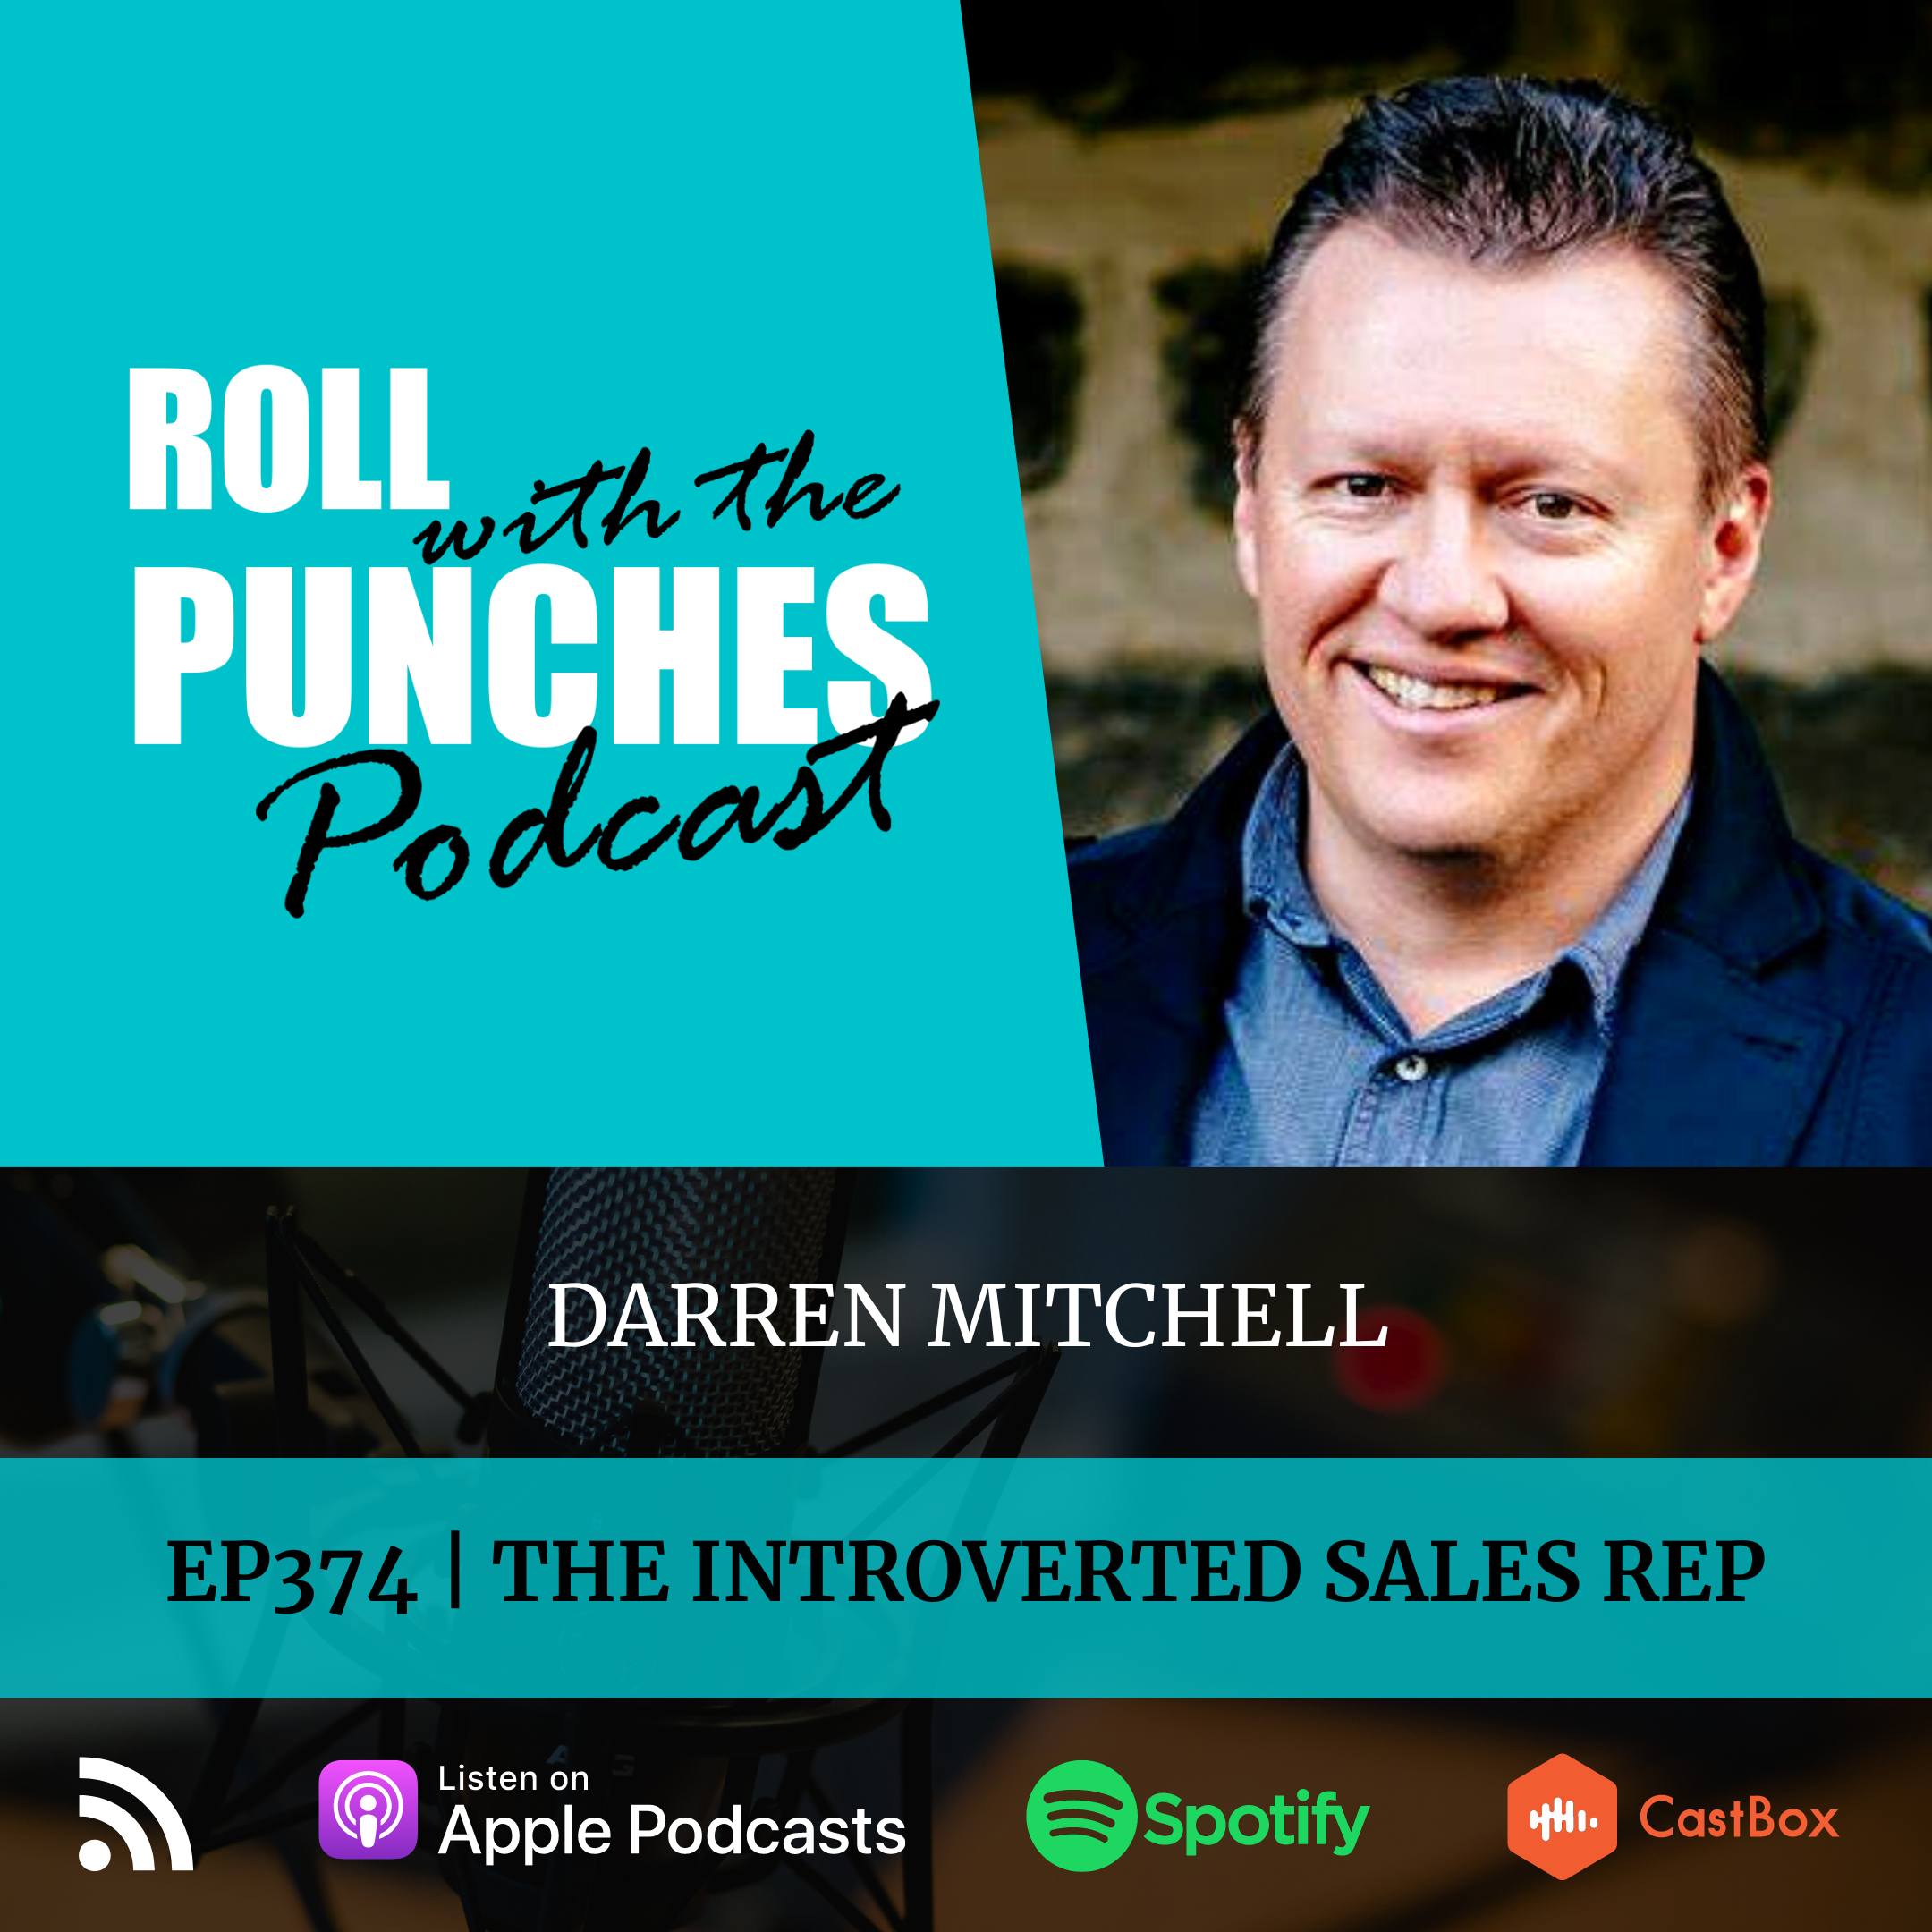 The Introverted Sales Rep | Darren Mitchell - 374